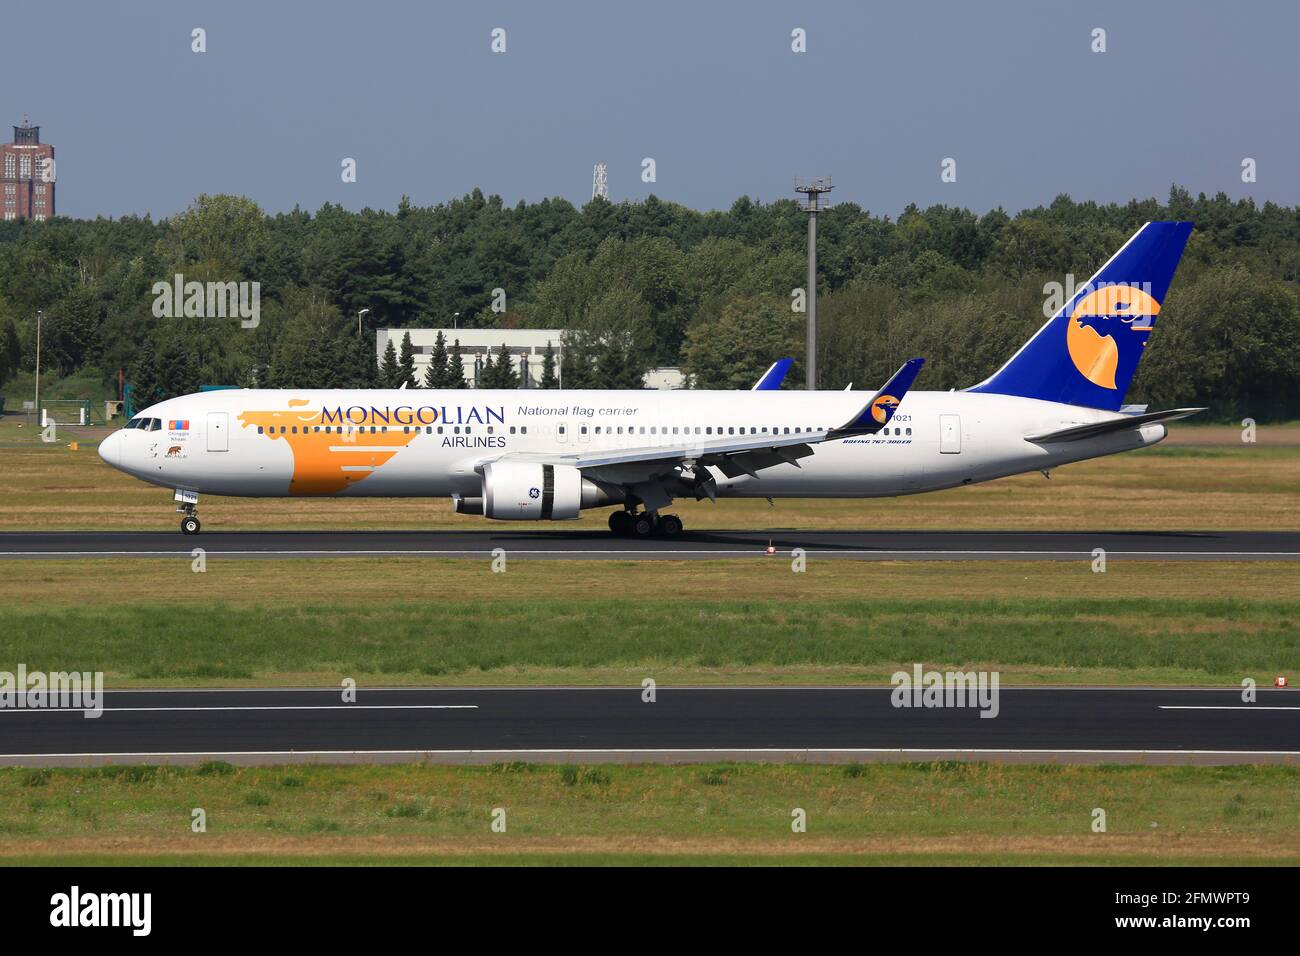 Berlin, Germany - 30. August 2017: MIAT Mongolian Airlines Boeing 767-300 at Berlin Tegel airport (TXL) in Germany. Boeing is an aircraft manufacturer Stock Photo